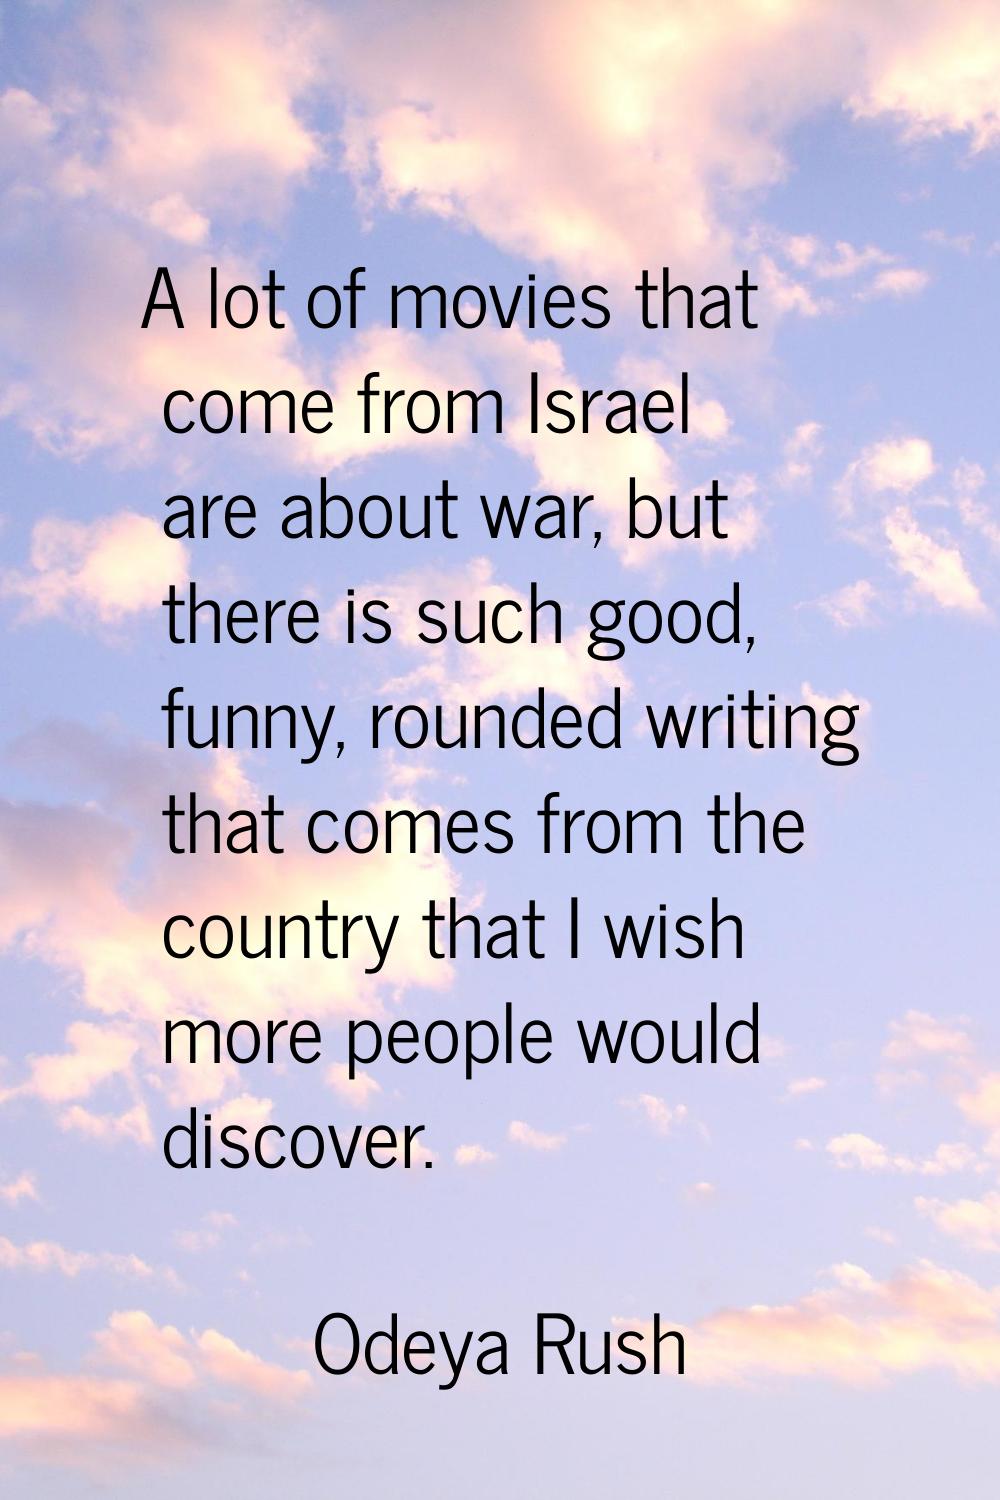 A lot of movies that come from Israel are about war, but there is such good, funny, rounded writing